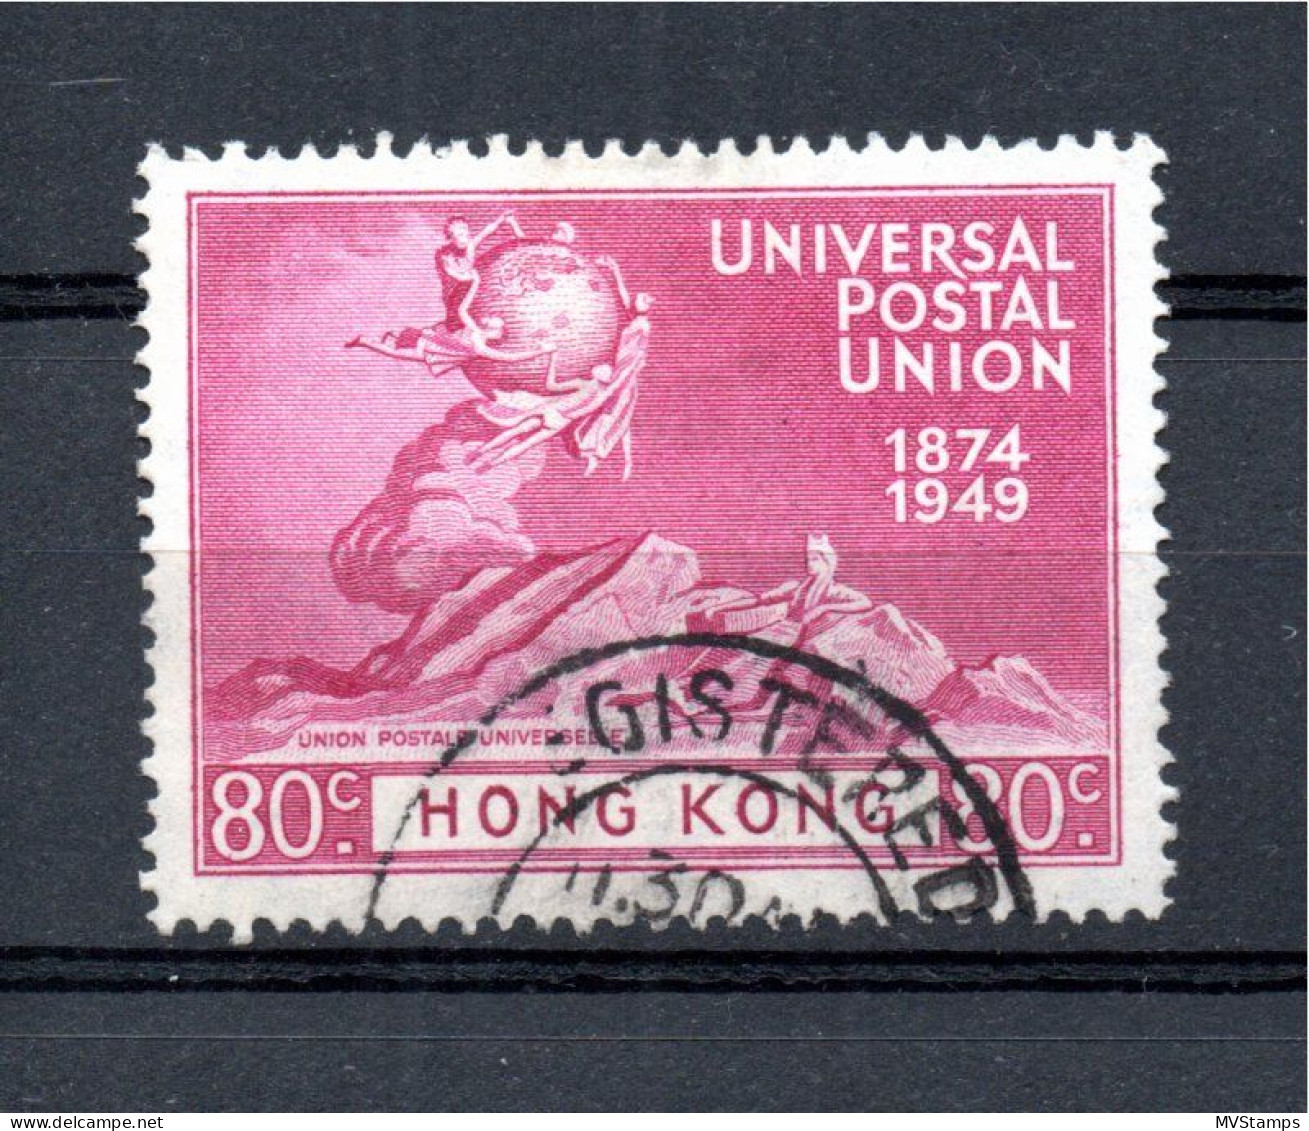 Hong Kong 1949 Old 80 Cents UPU Stamp (Michel 176) Nice Used - Used Stamps